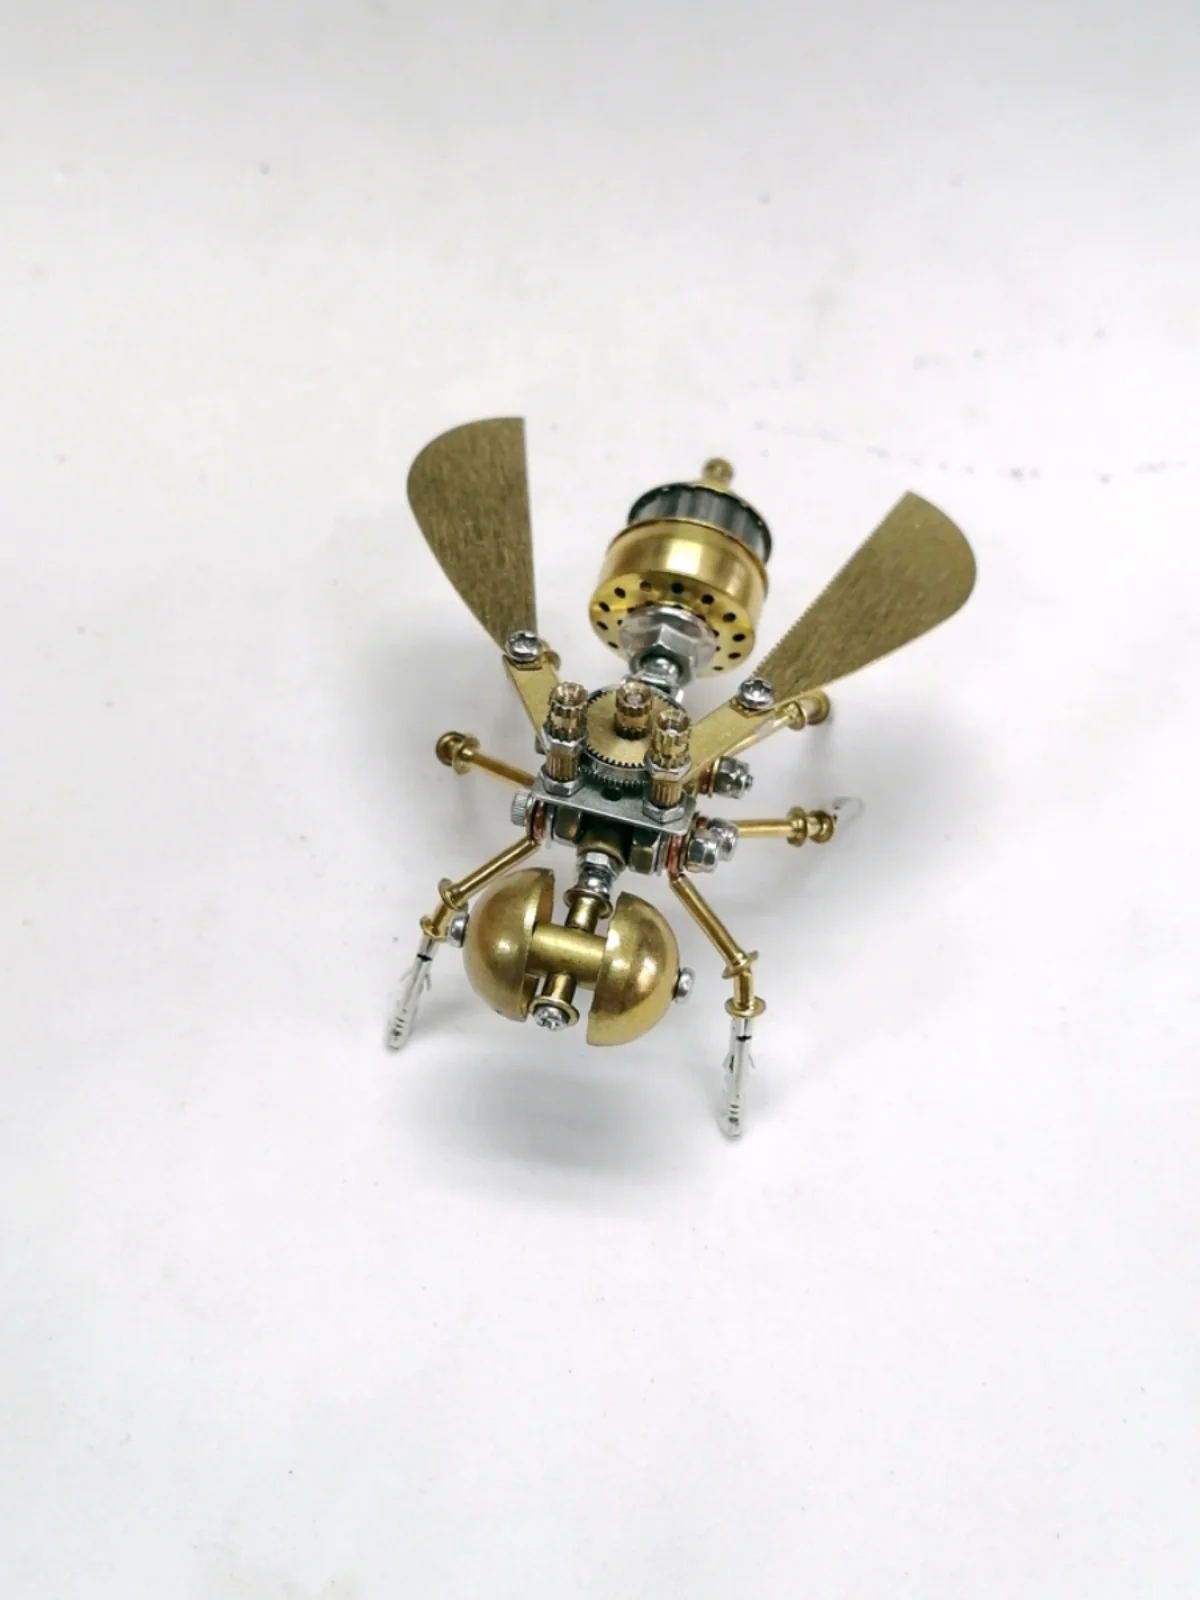 

Steampunk Mechanical Insect Little Bee 3D Metal Assembly Model Handmade DIY Decompression Puzzle Toy